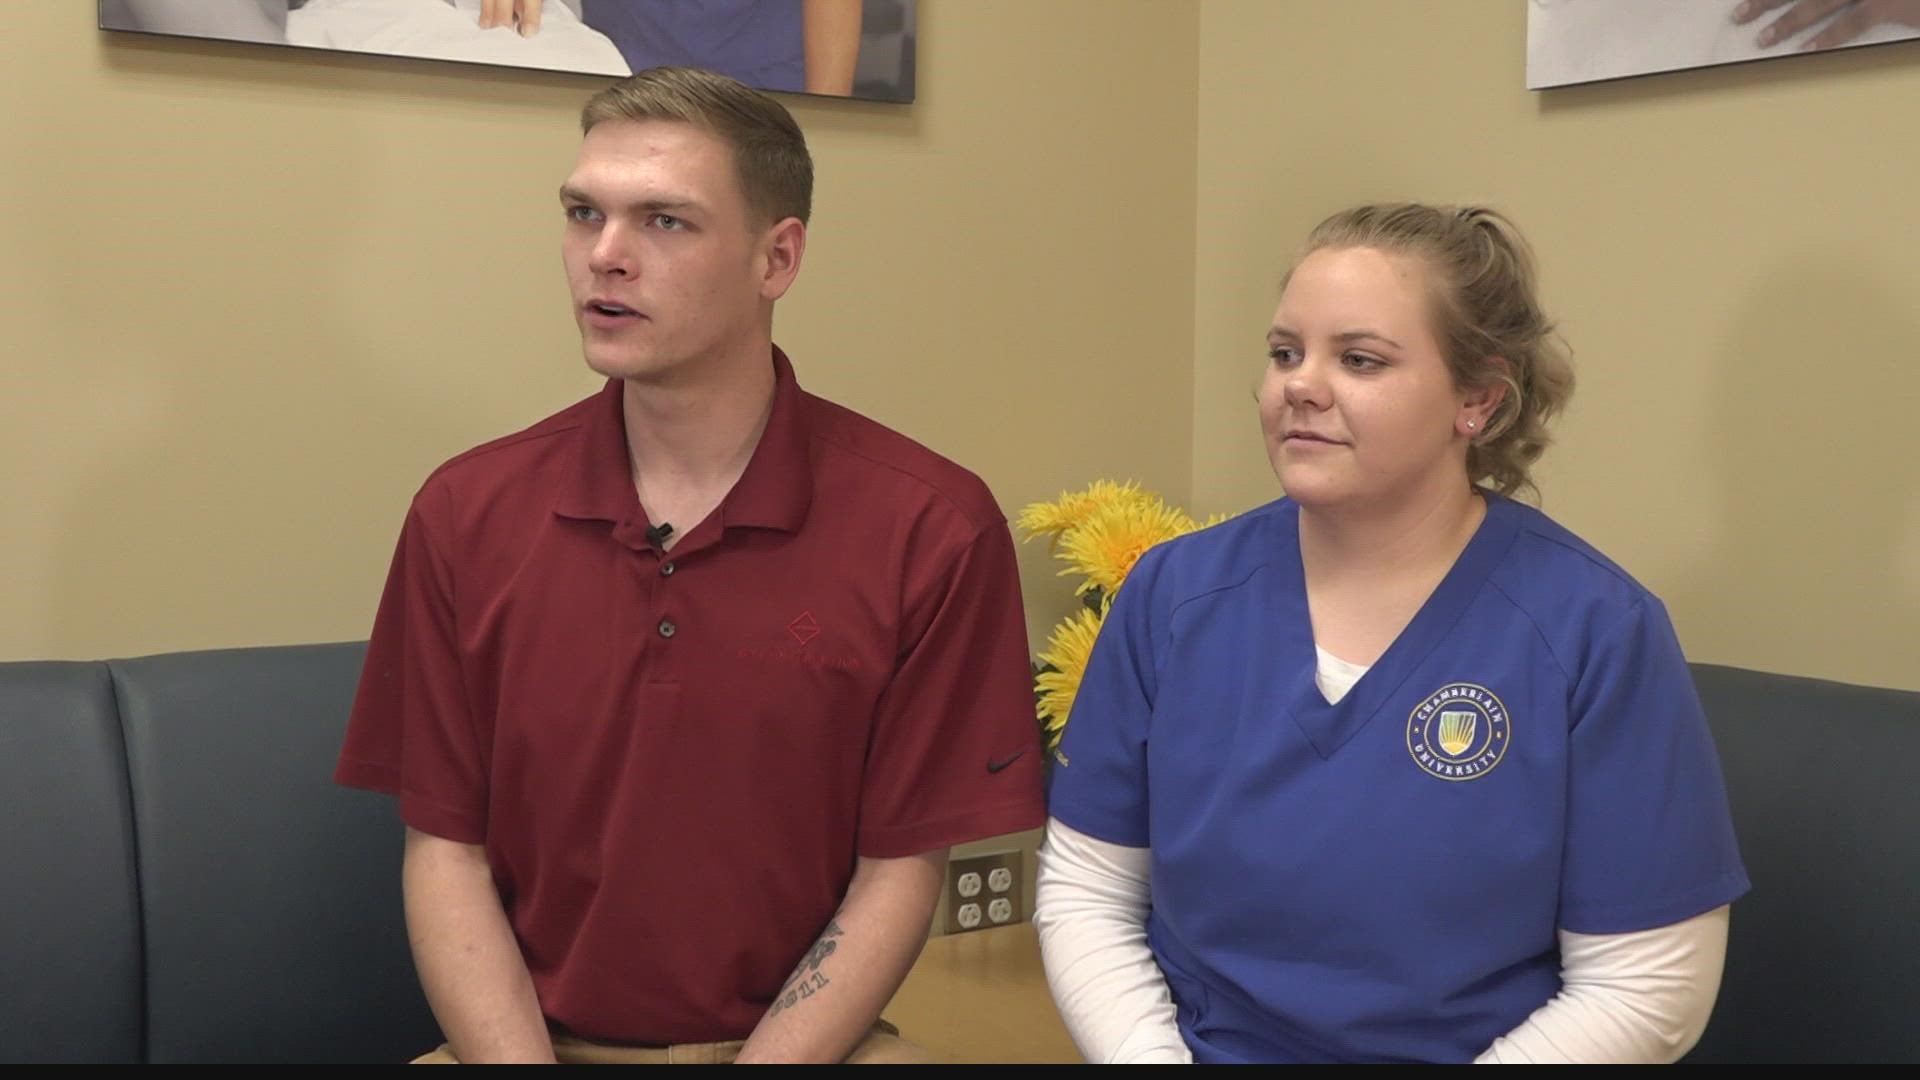 Meet a local scholarship recipient who's going to nursing school with help from "Folds of Honor."